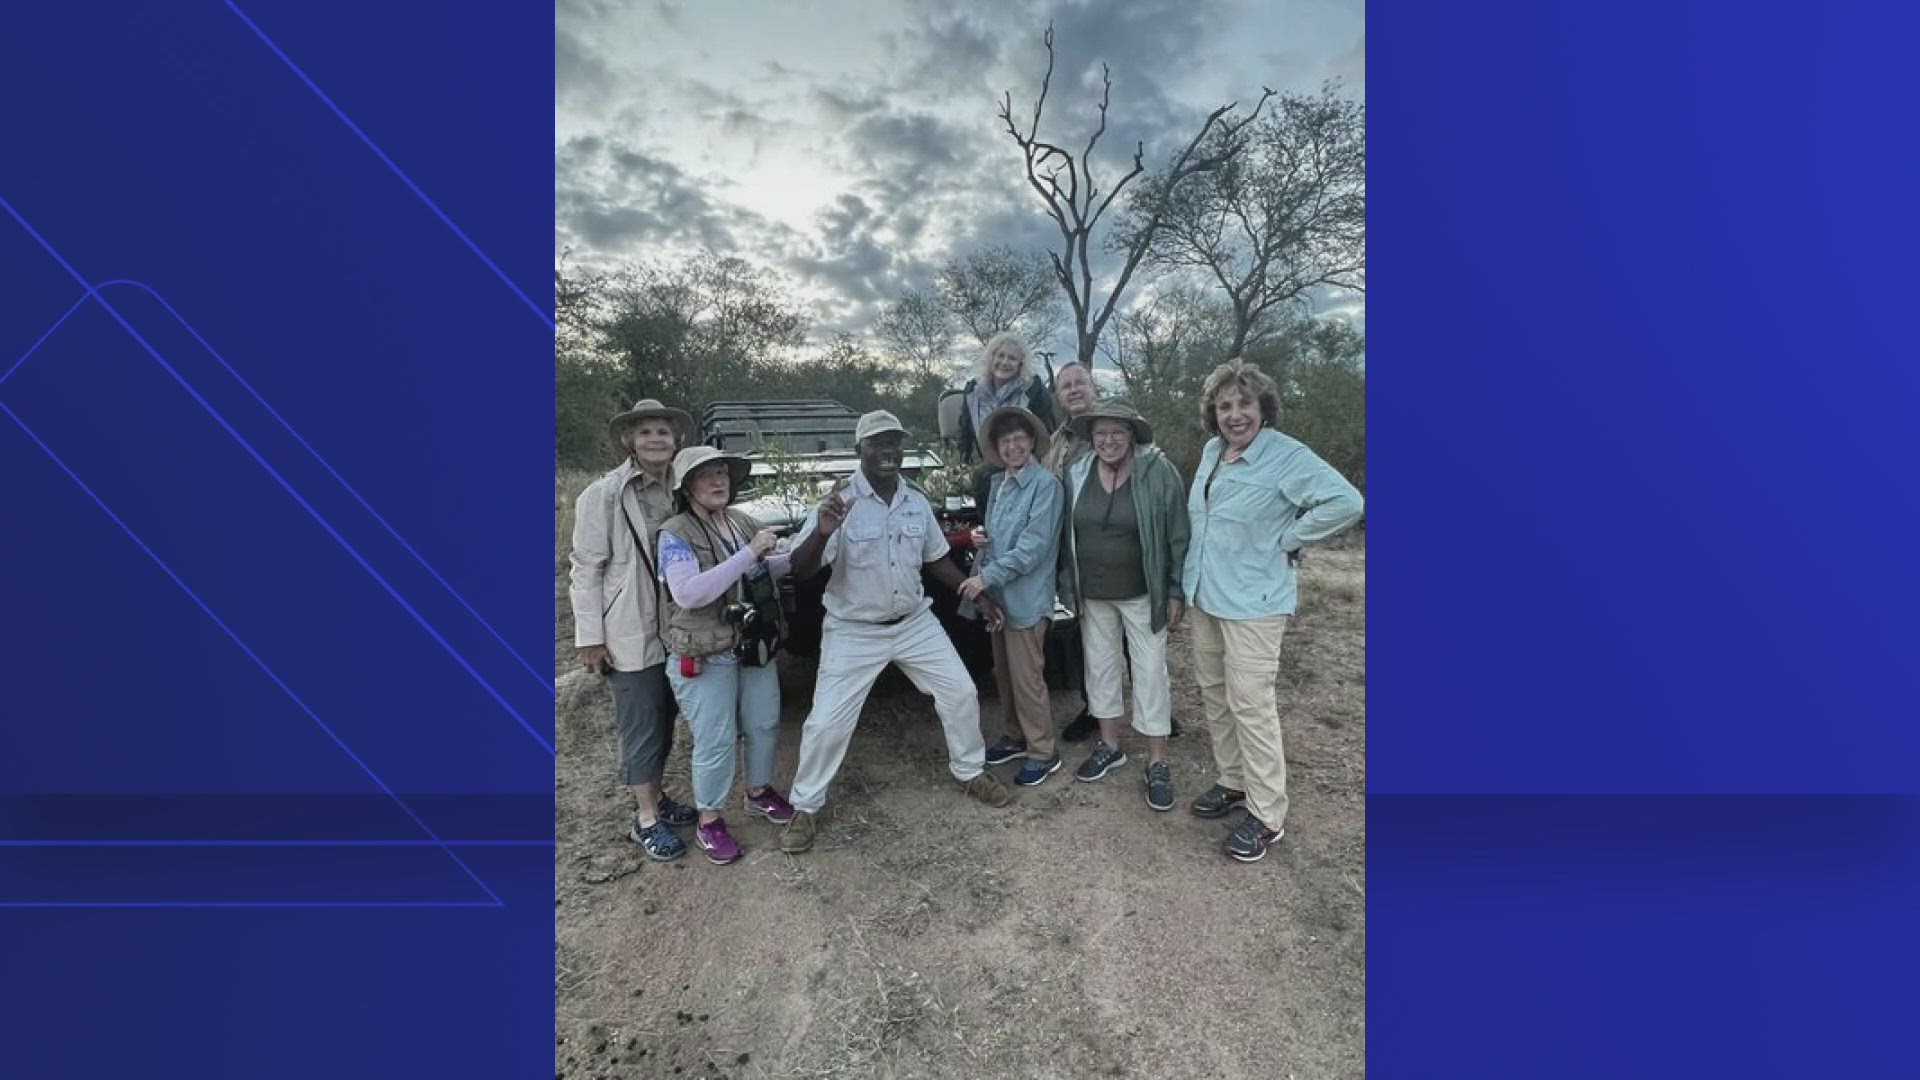 A friend confirms the victim was 79-year-old Gail Mattson of Sun City. A tour company says a bull elephant charged a vehicle, killing Mattson and injuring another.